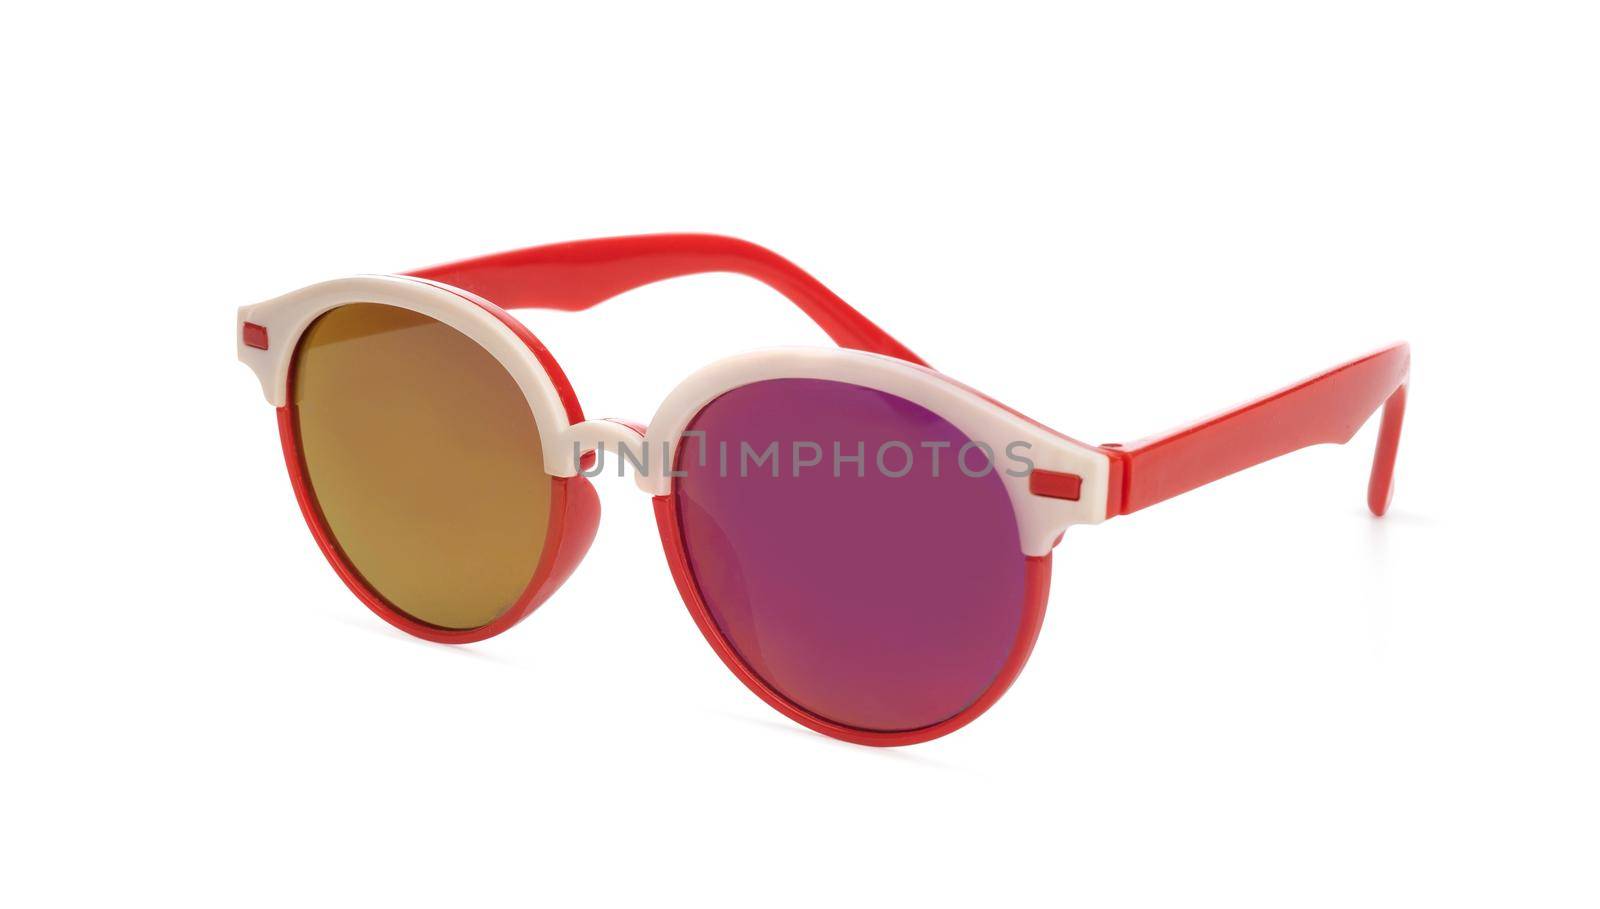 Sunglasses in red frame with dots isolated on white background